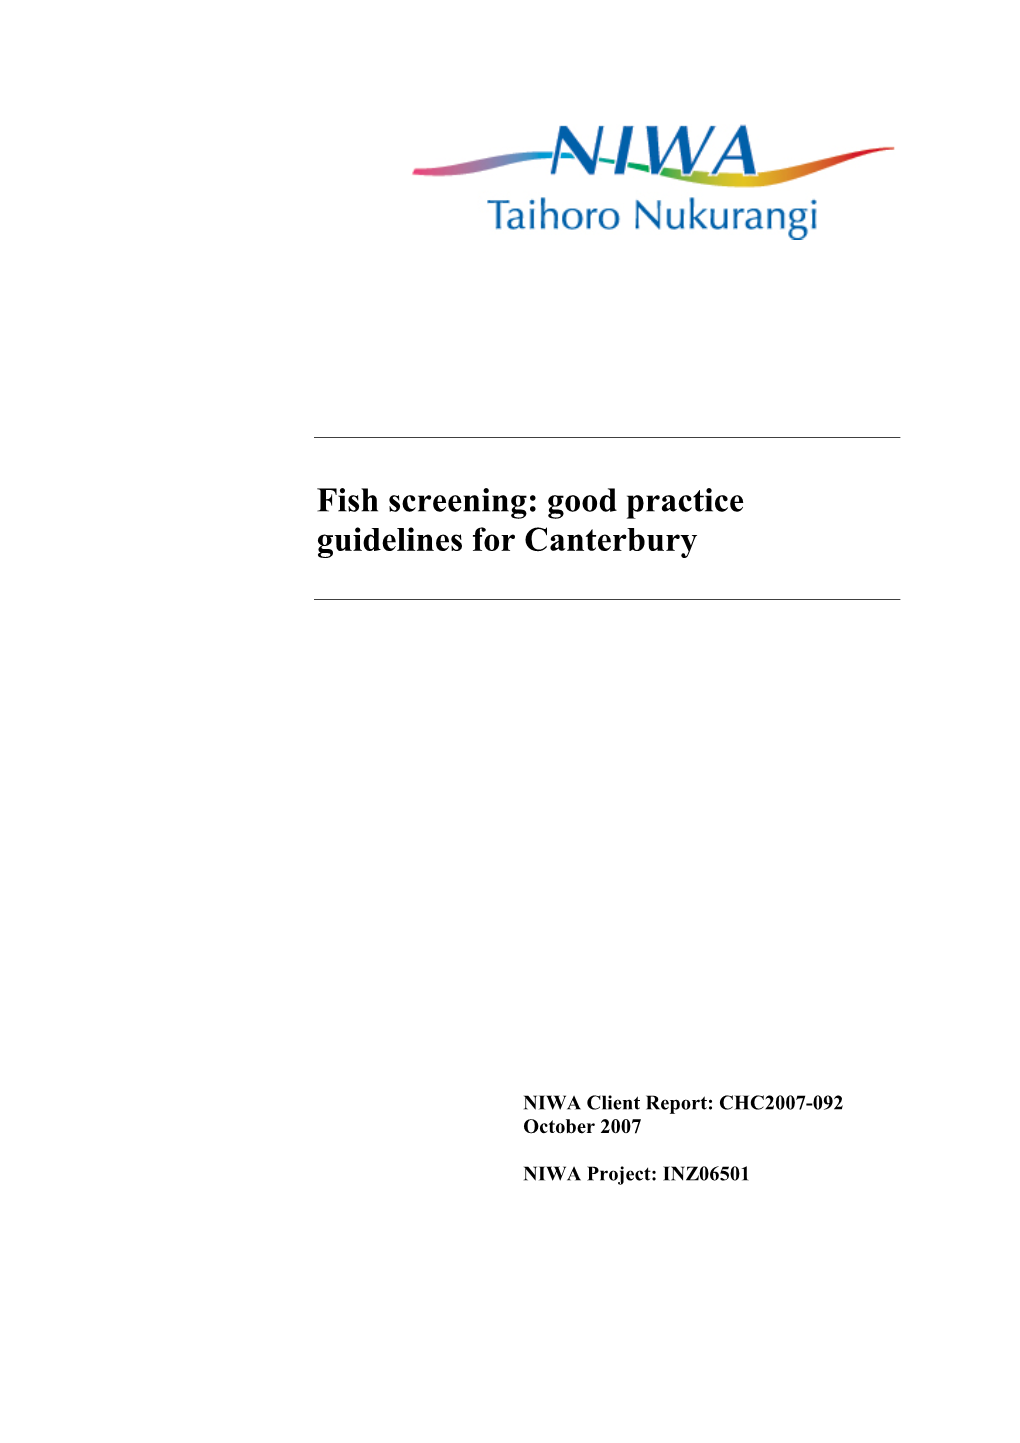 Fish Screening: Good Practice Guidelines for Canterbury